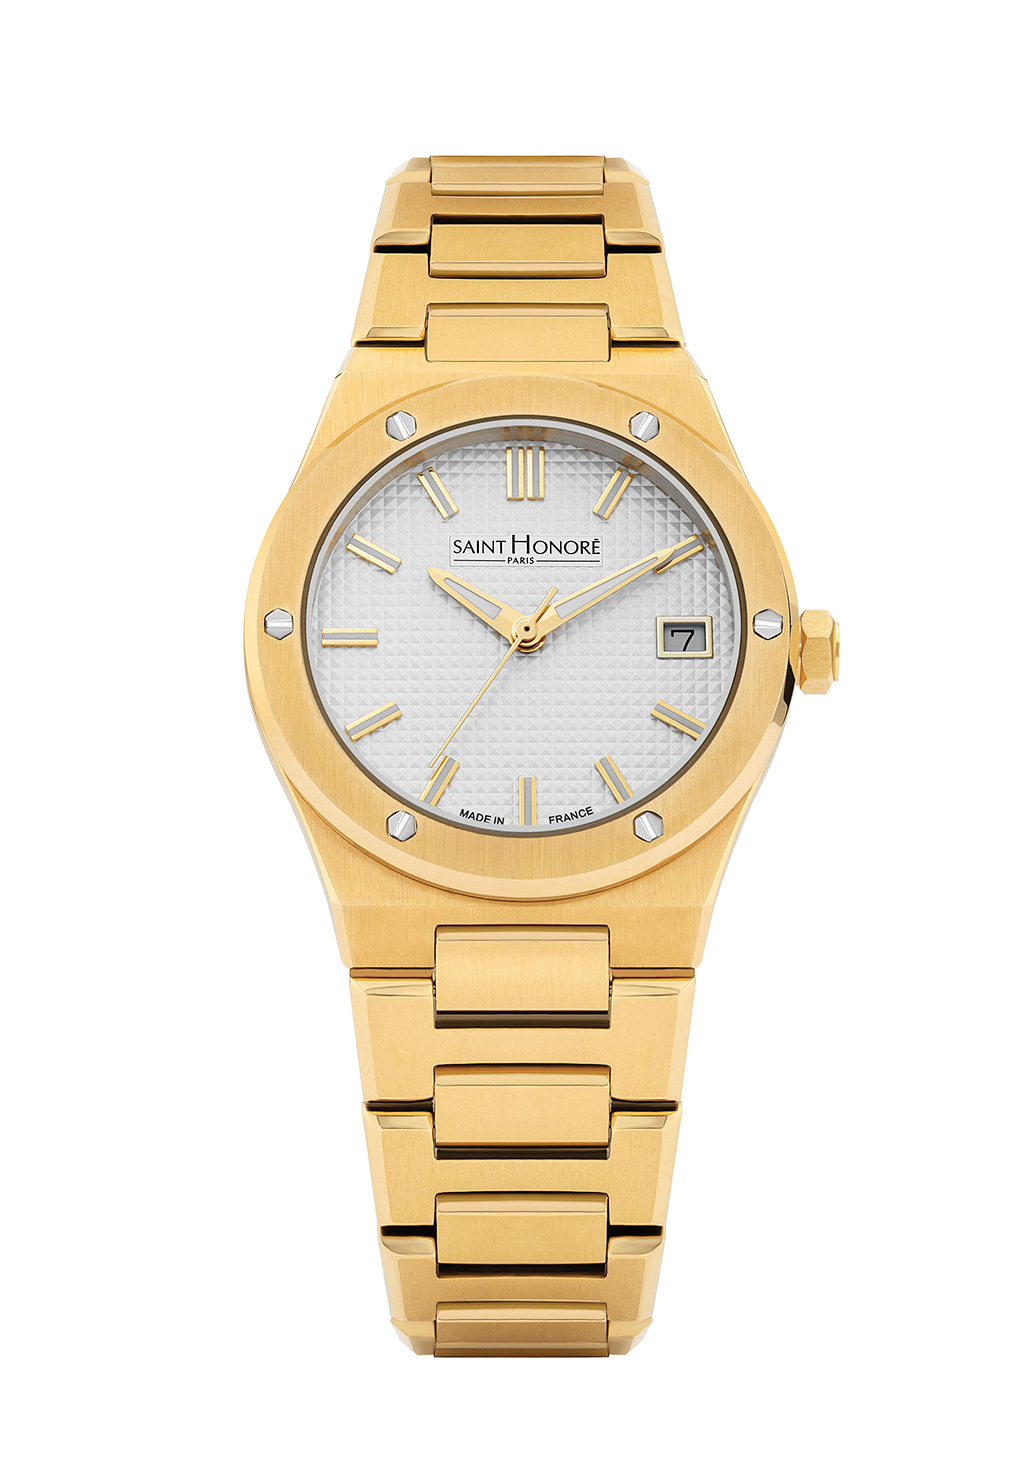 HAUSSMAN II Women's watch - ion plating gold case, white dial, Two-tone IPG metal strap